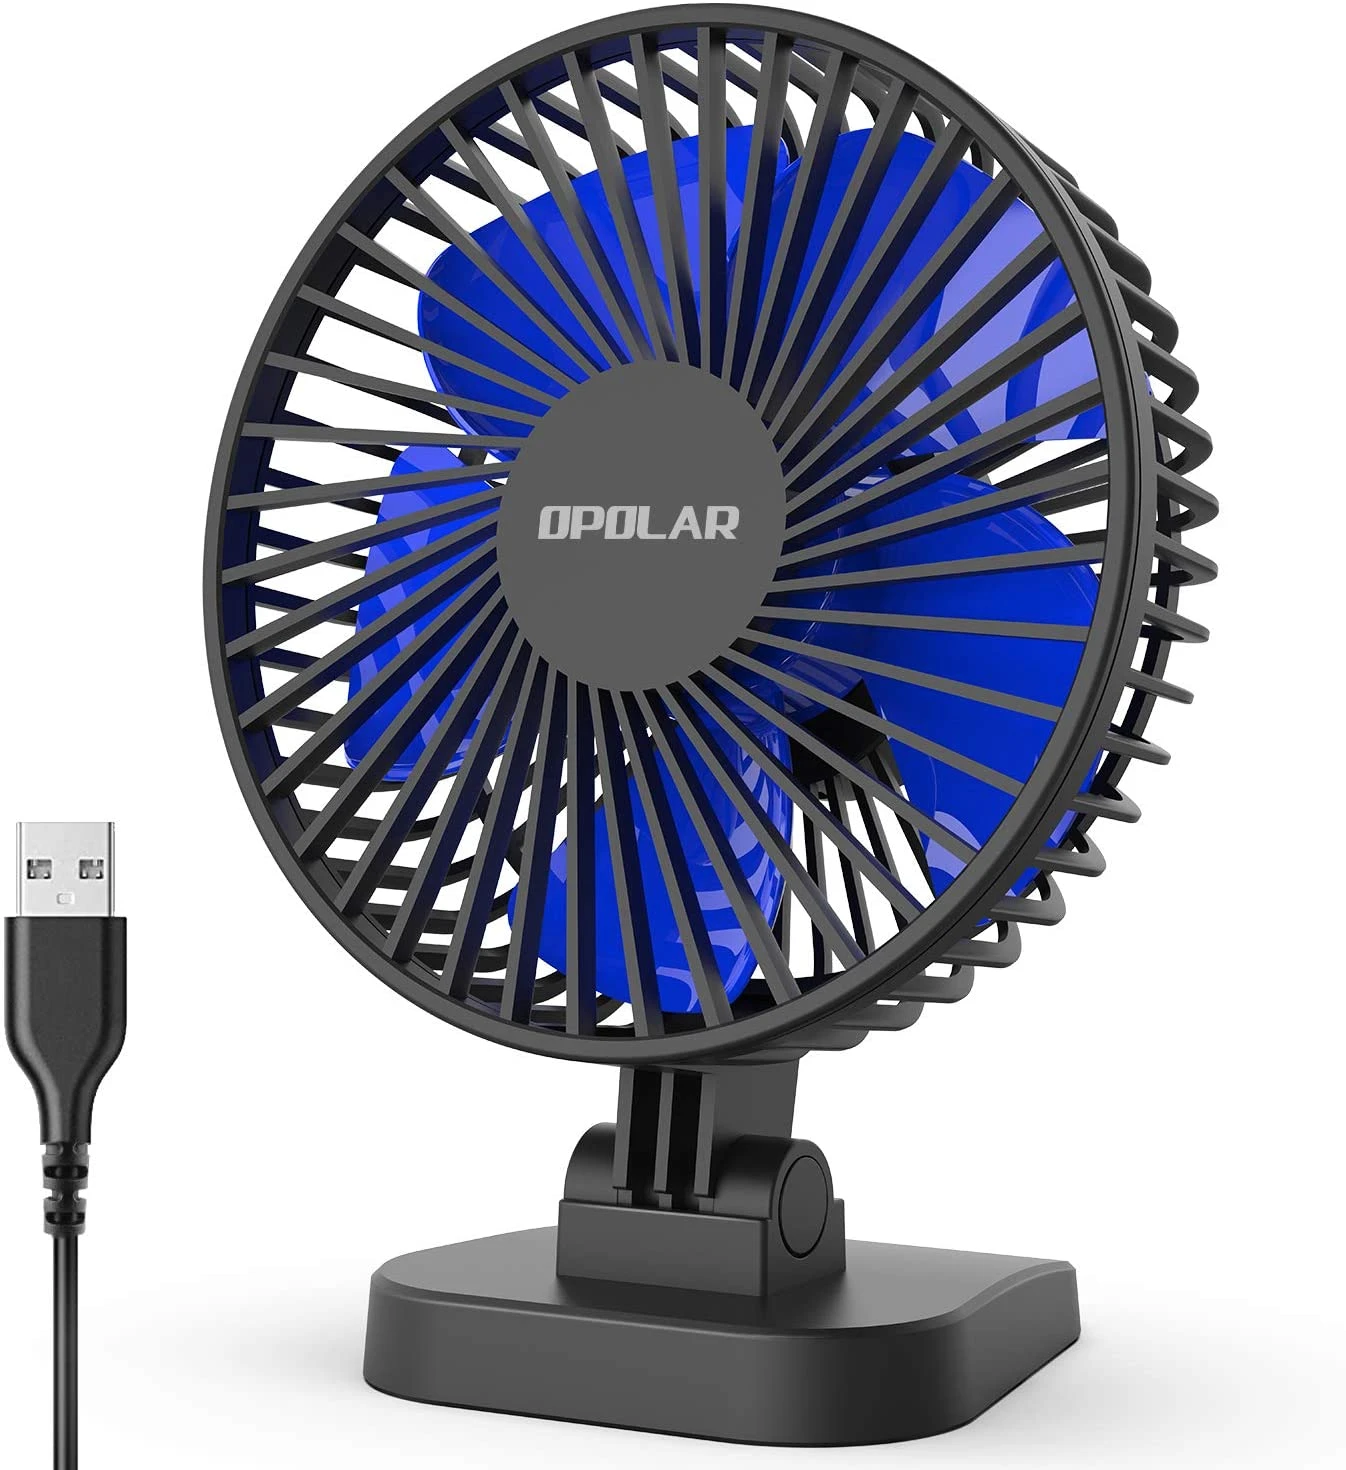 Mini USB Desk Fan Better Cooling Perfect,Strong Airflow Whisper Quiet Portable Fan for Desktop Office Table,3 Speeds,4.9 ft cord